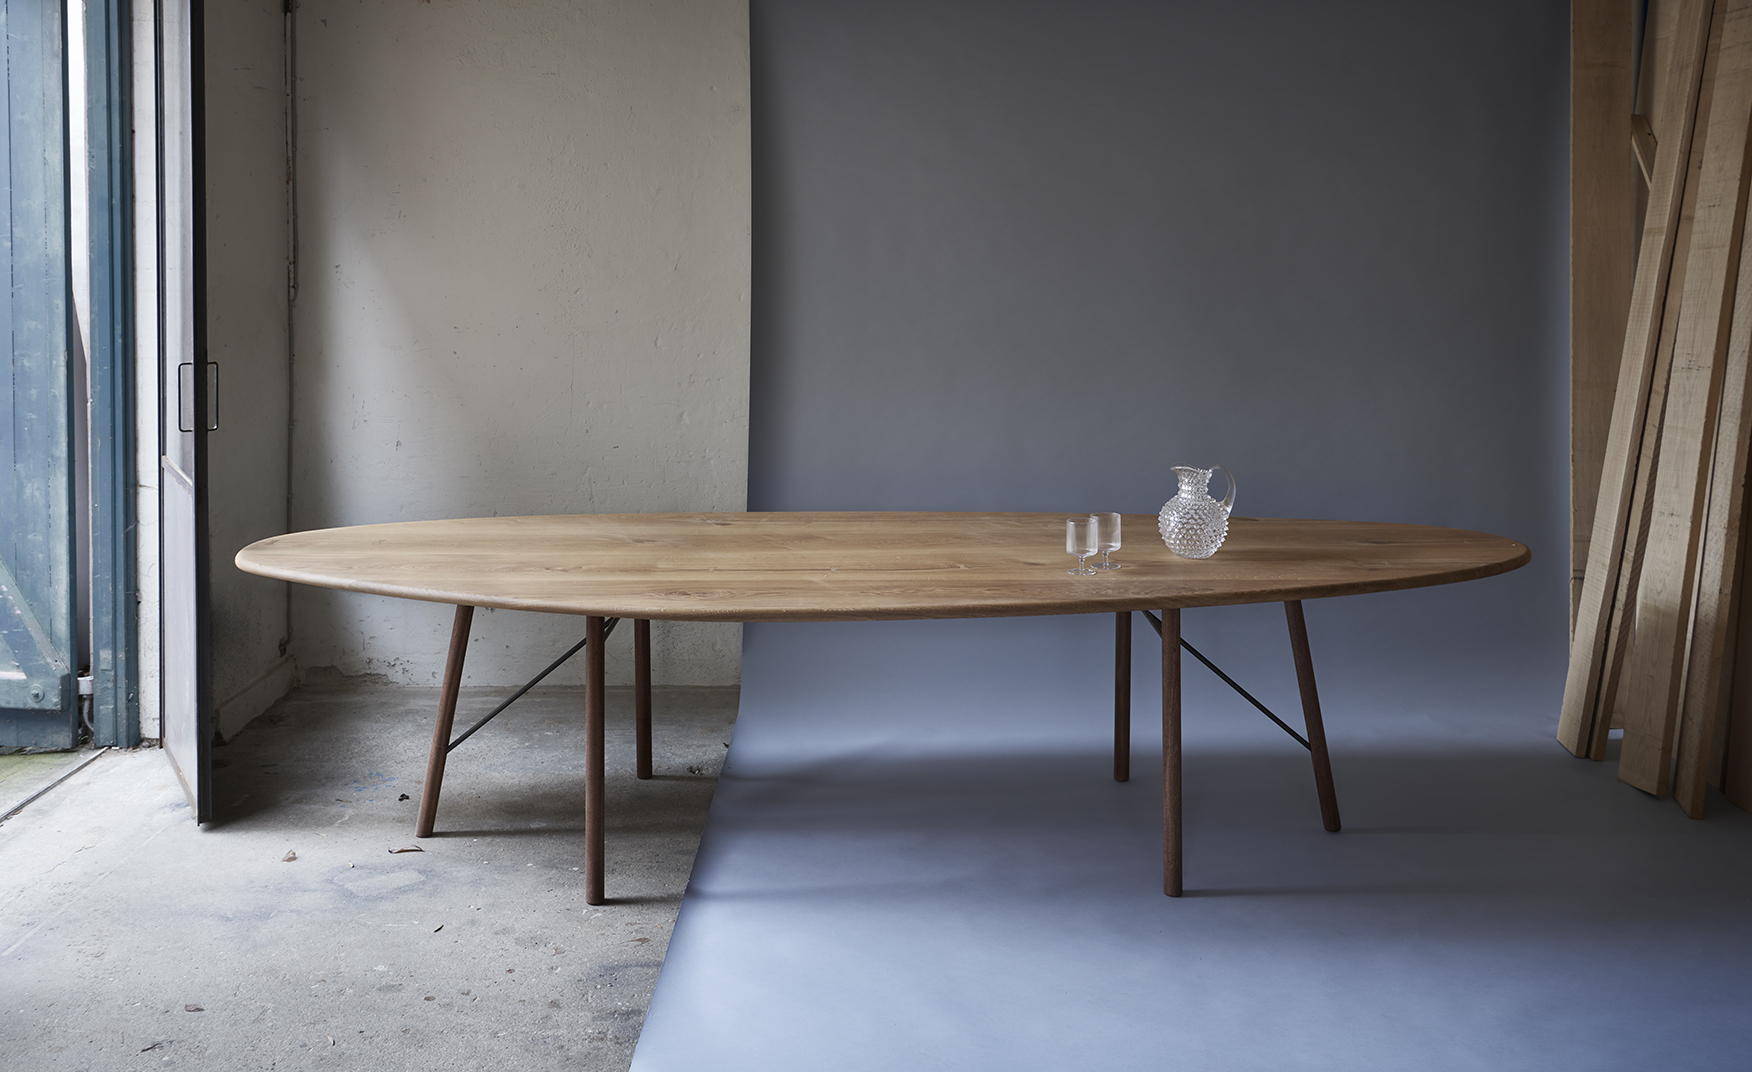 Alai table, designed and my in Denmark by Bessards Studio